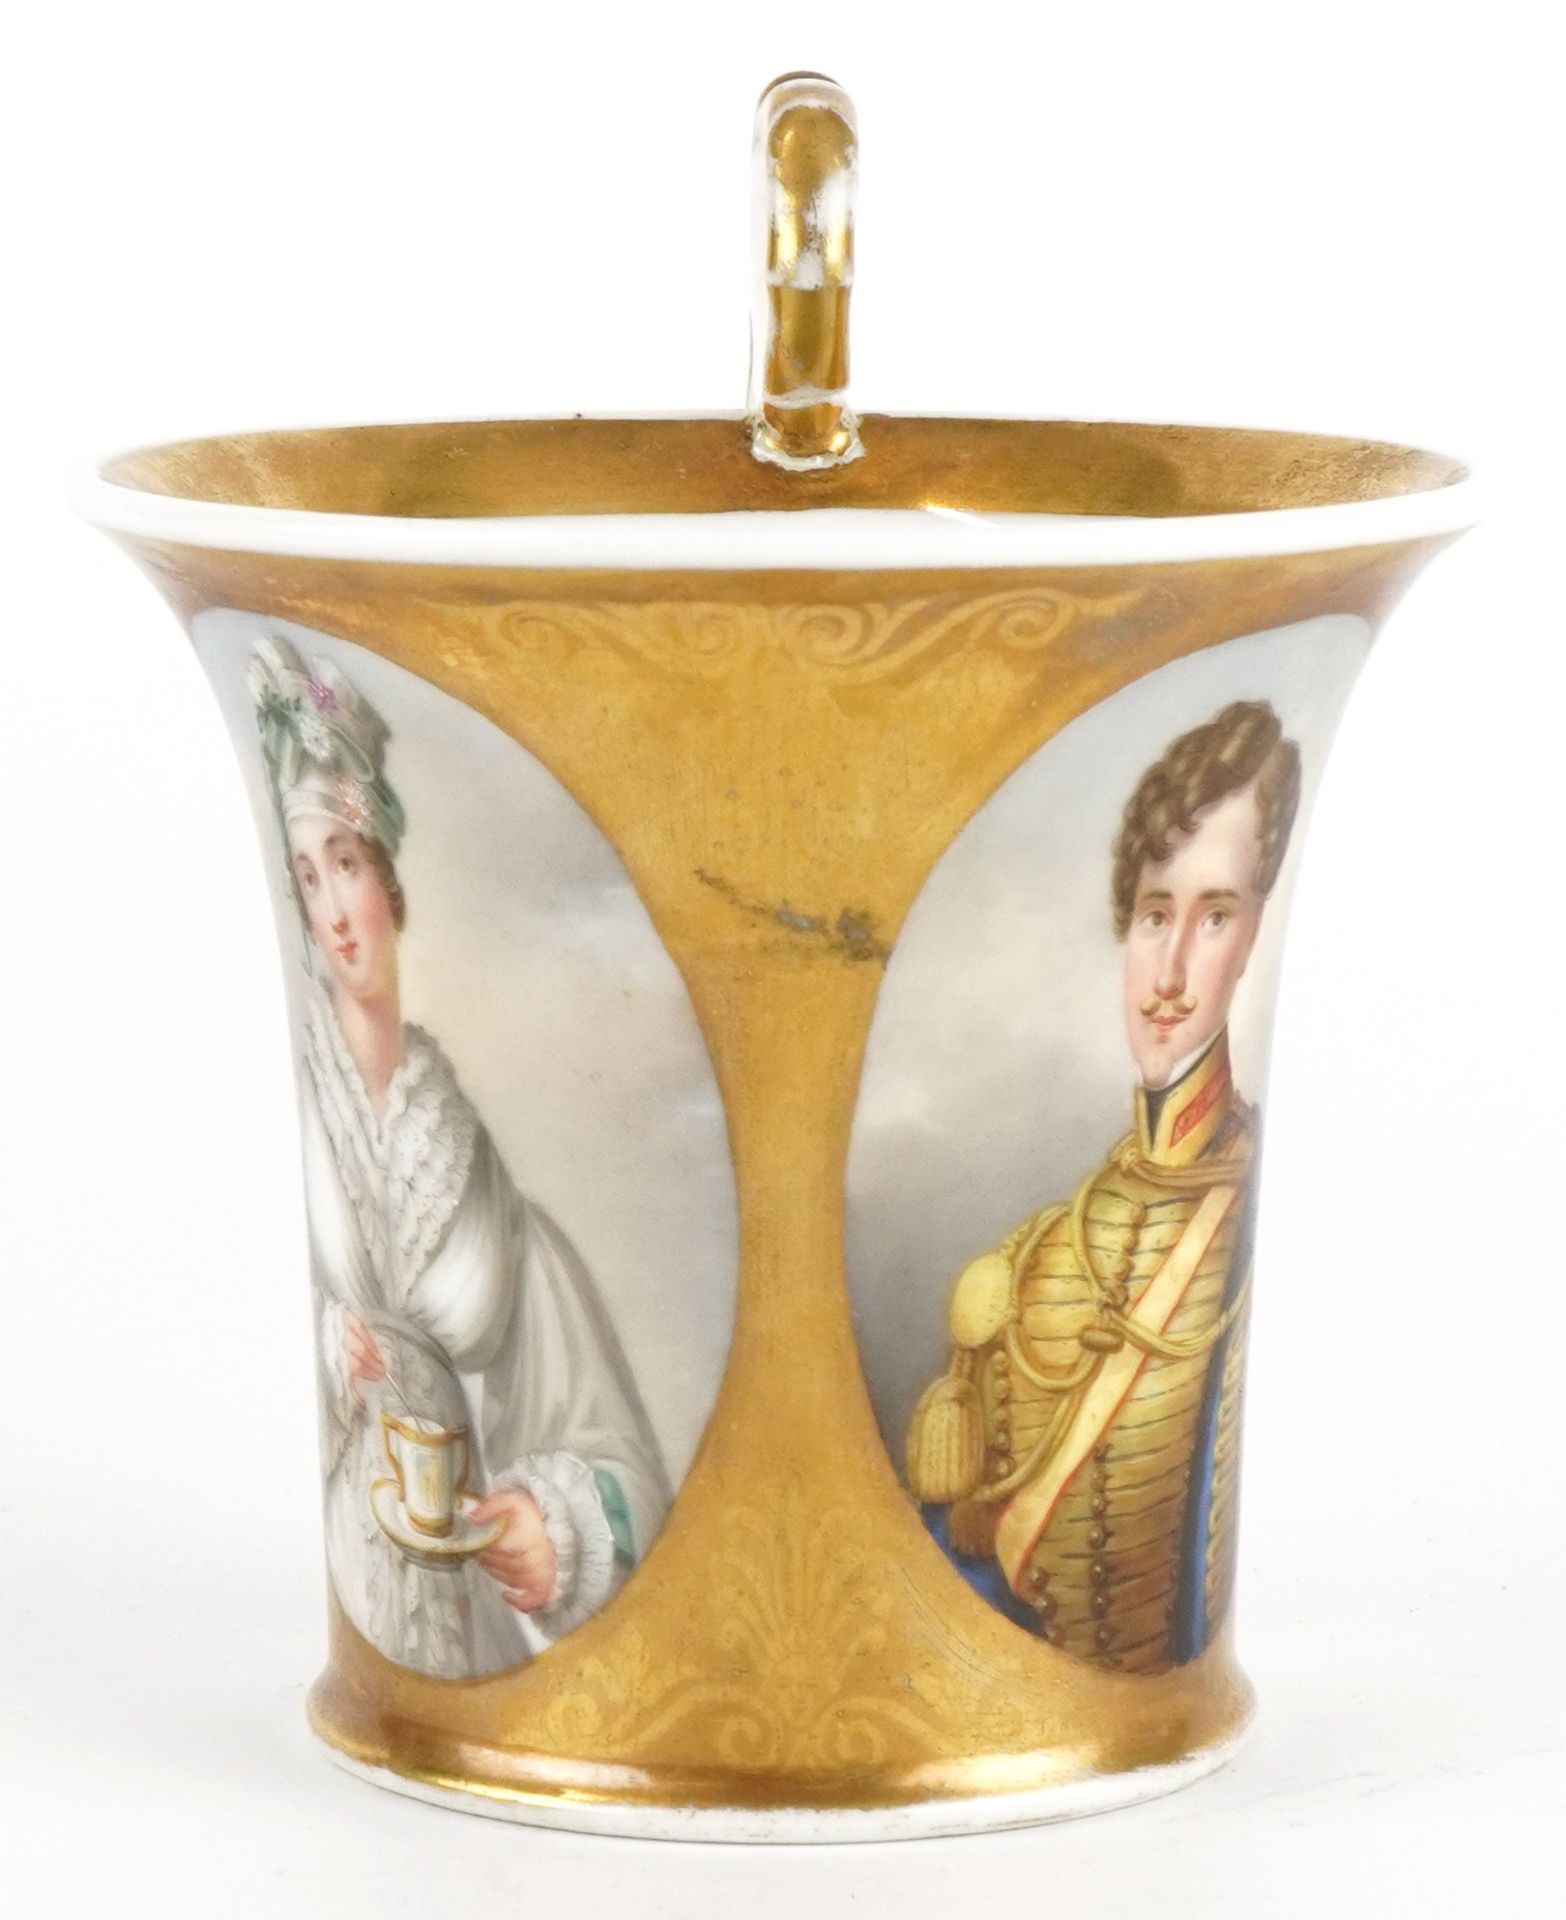 Early 19th century European porcelain cup hand painted with oval portraits of young Queen Victoria